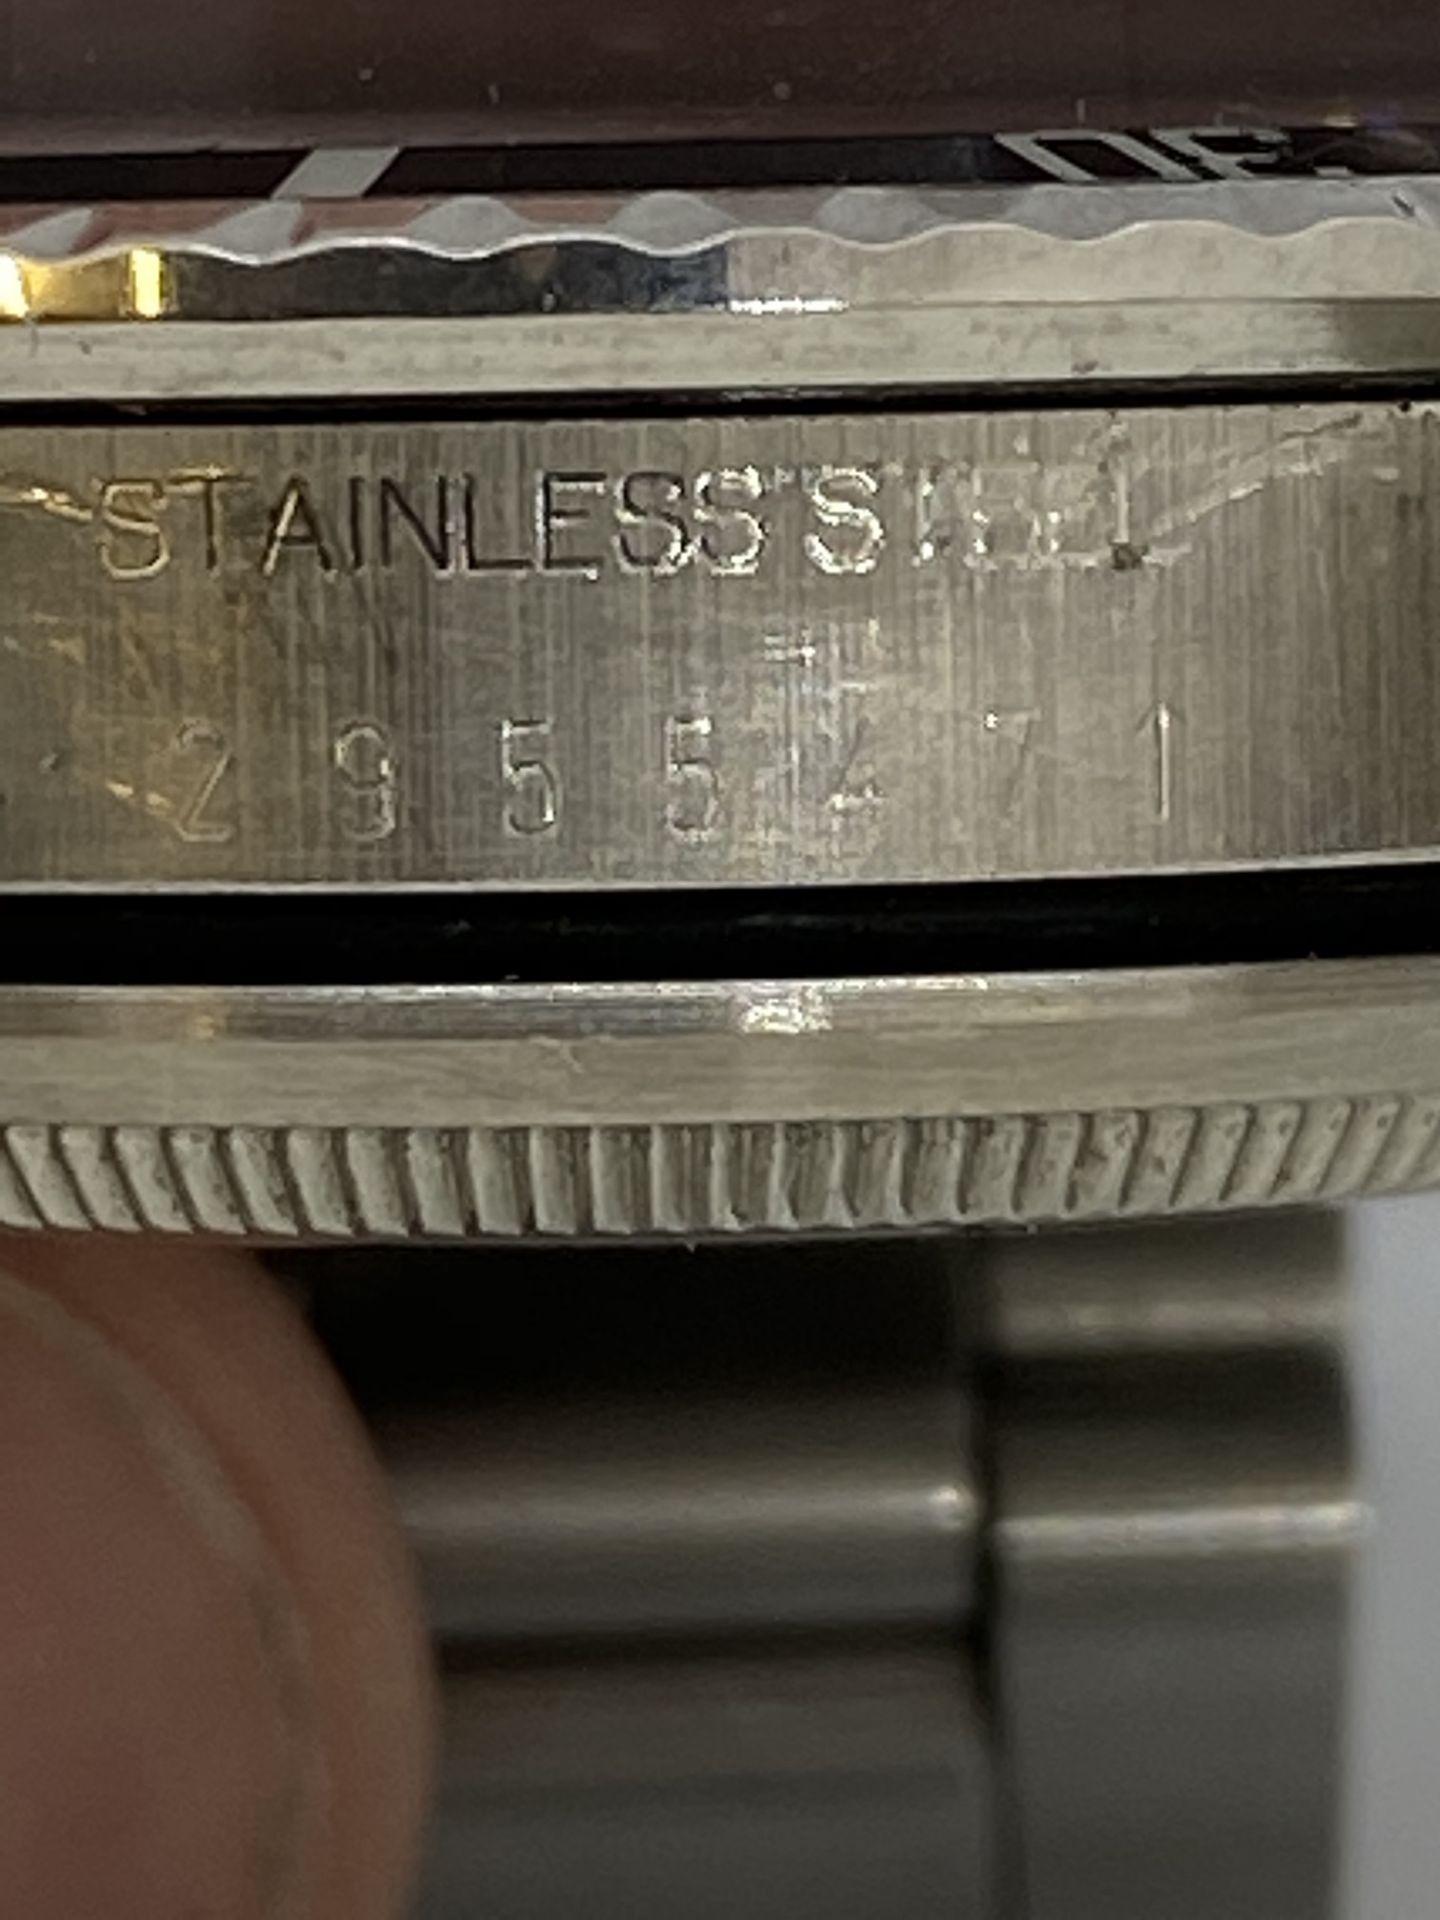 WATCH MARKED ROLEX SUBMARINER - MOVEMENT WARRANTED AS ROLEX - Image 28 of 28